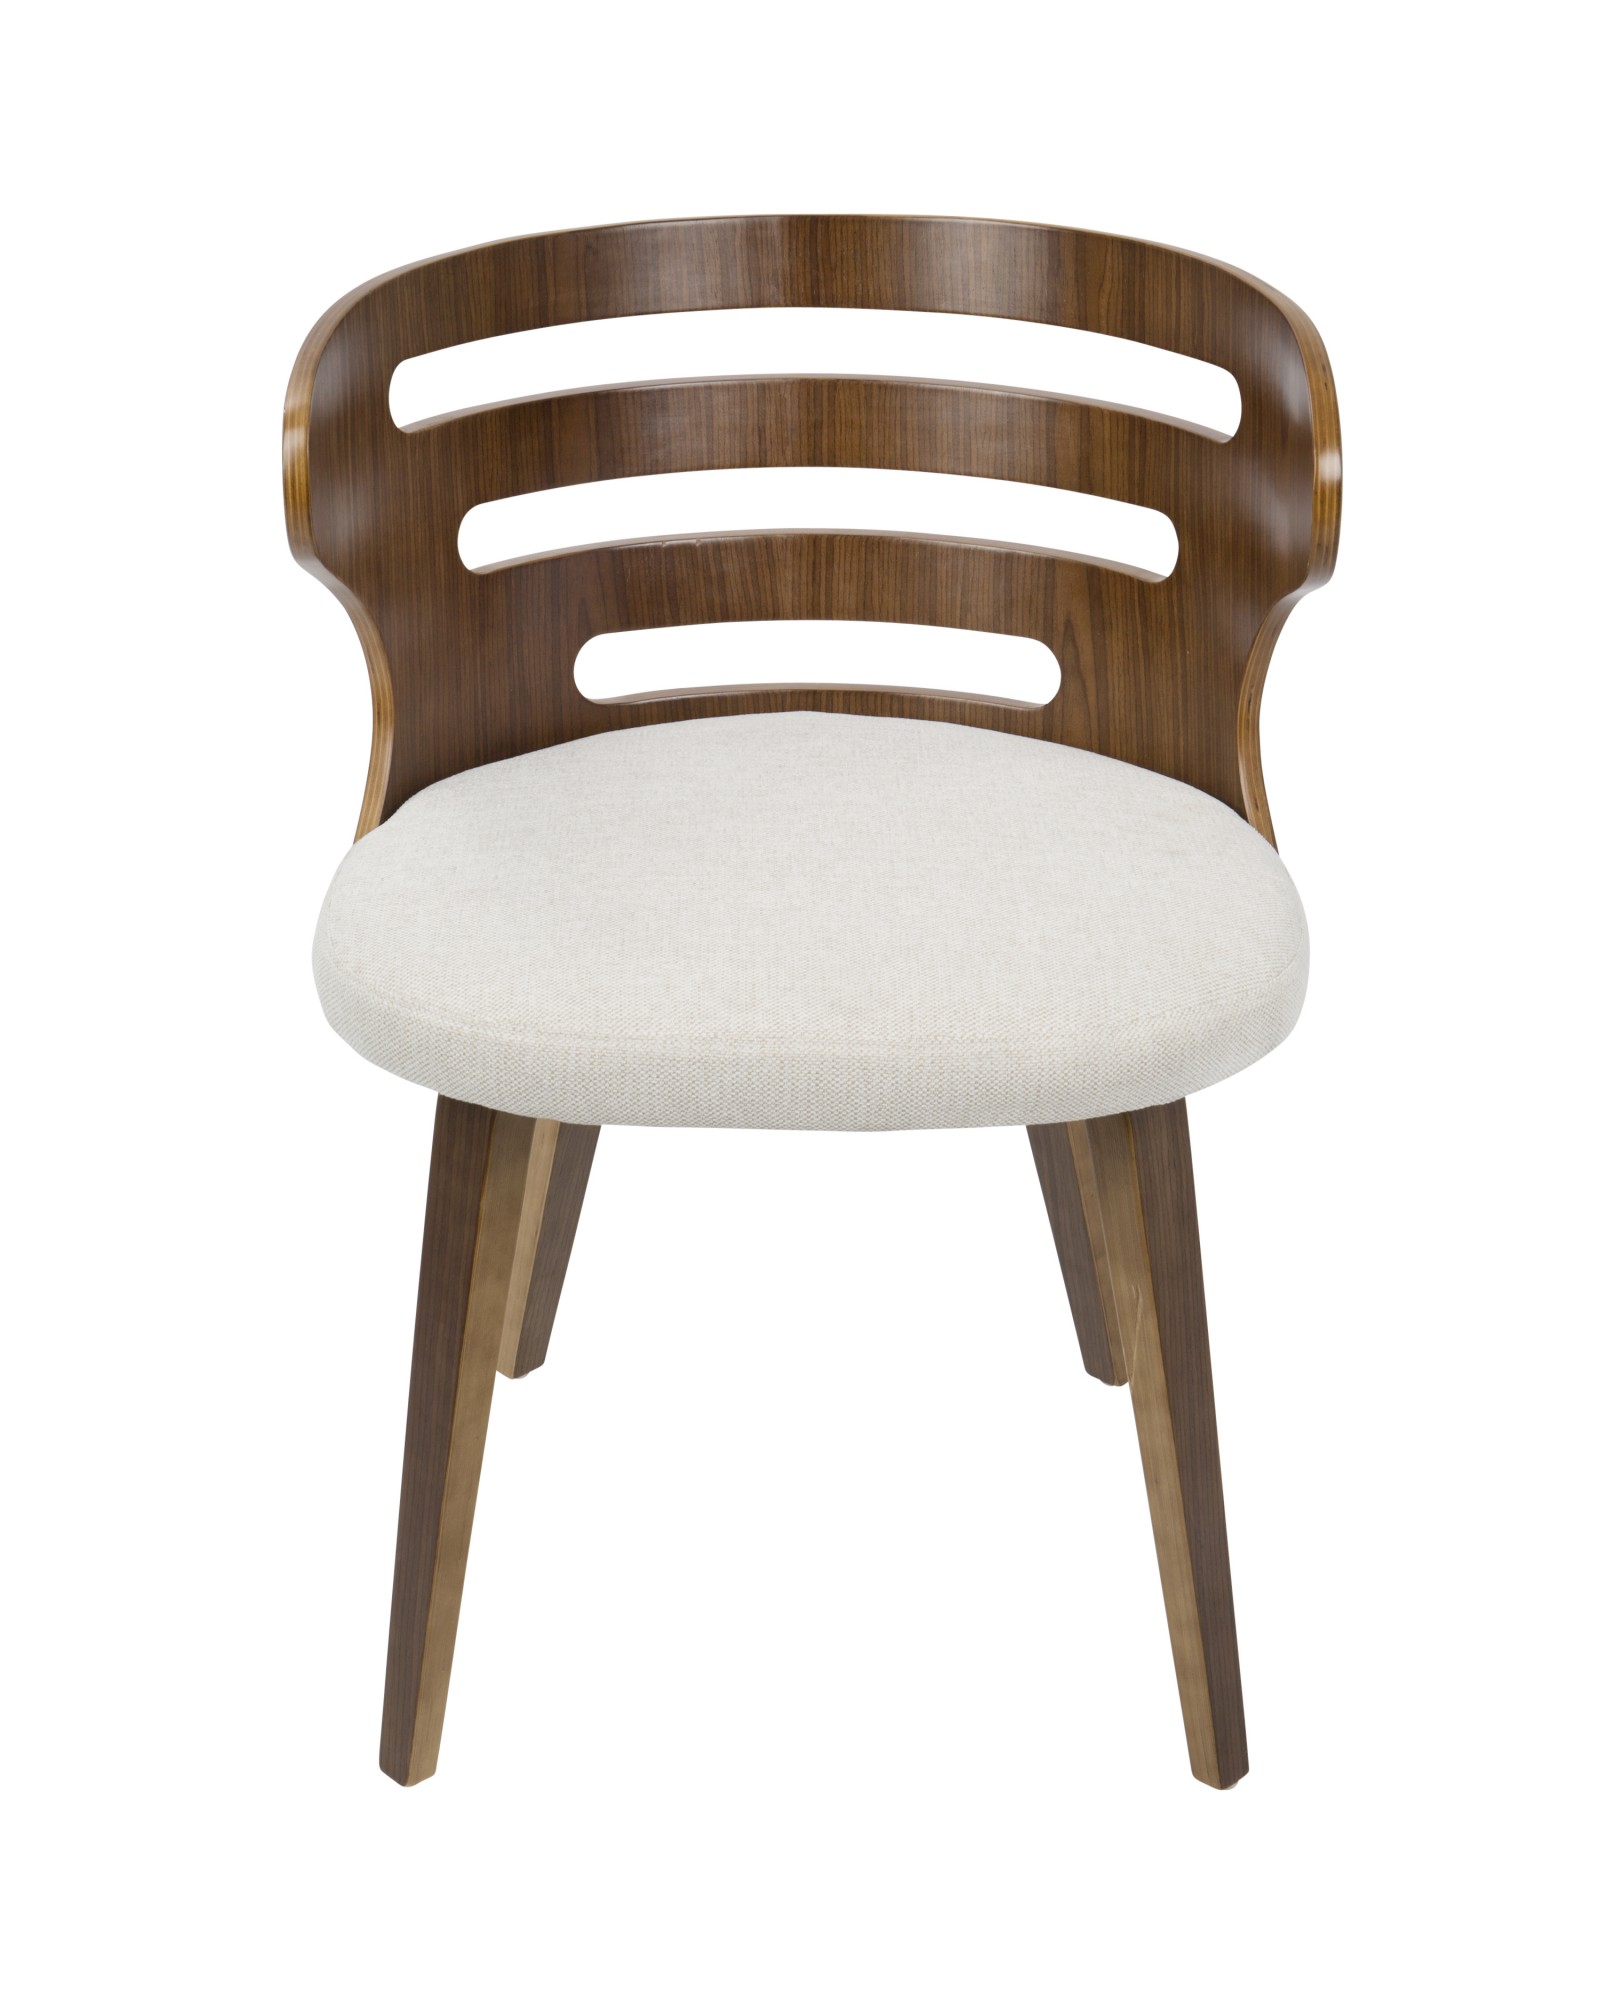 Cosi Mid-Century Modern Dining/Accent Chair in Walnut and Cream Fabric